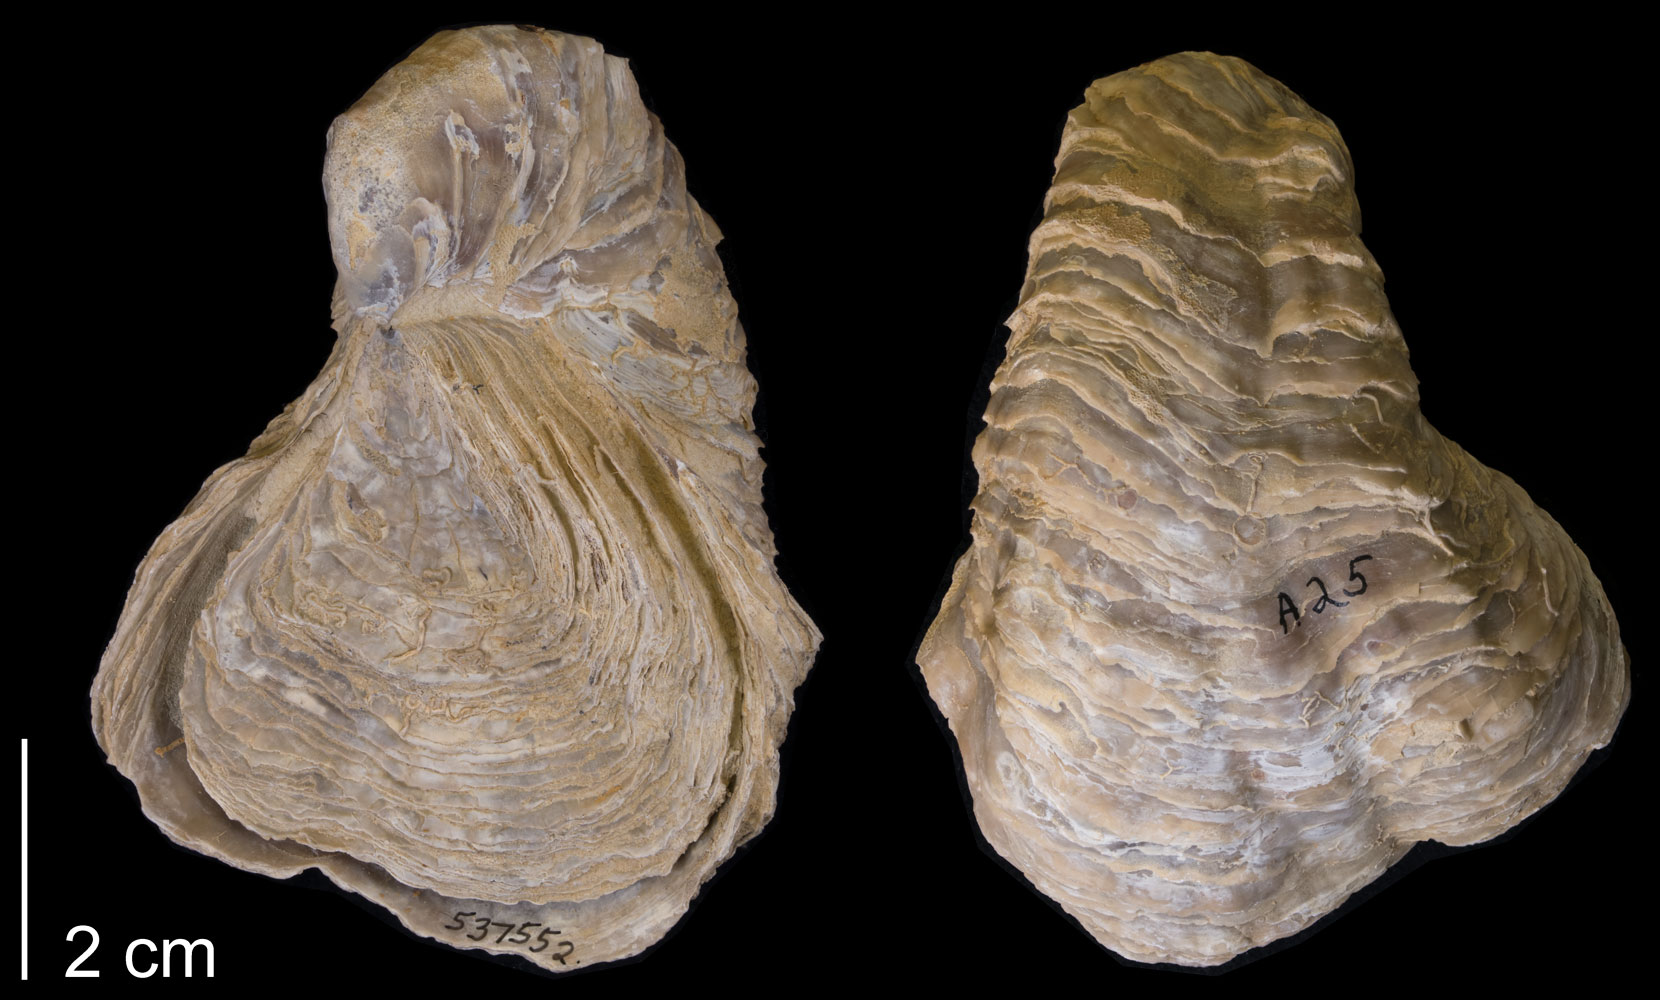 Photographs of a shell of a fossil oyster known as the devil's toenail, shown from above and below. This specimen is from the Cretaceous of Texas.